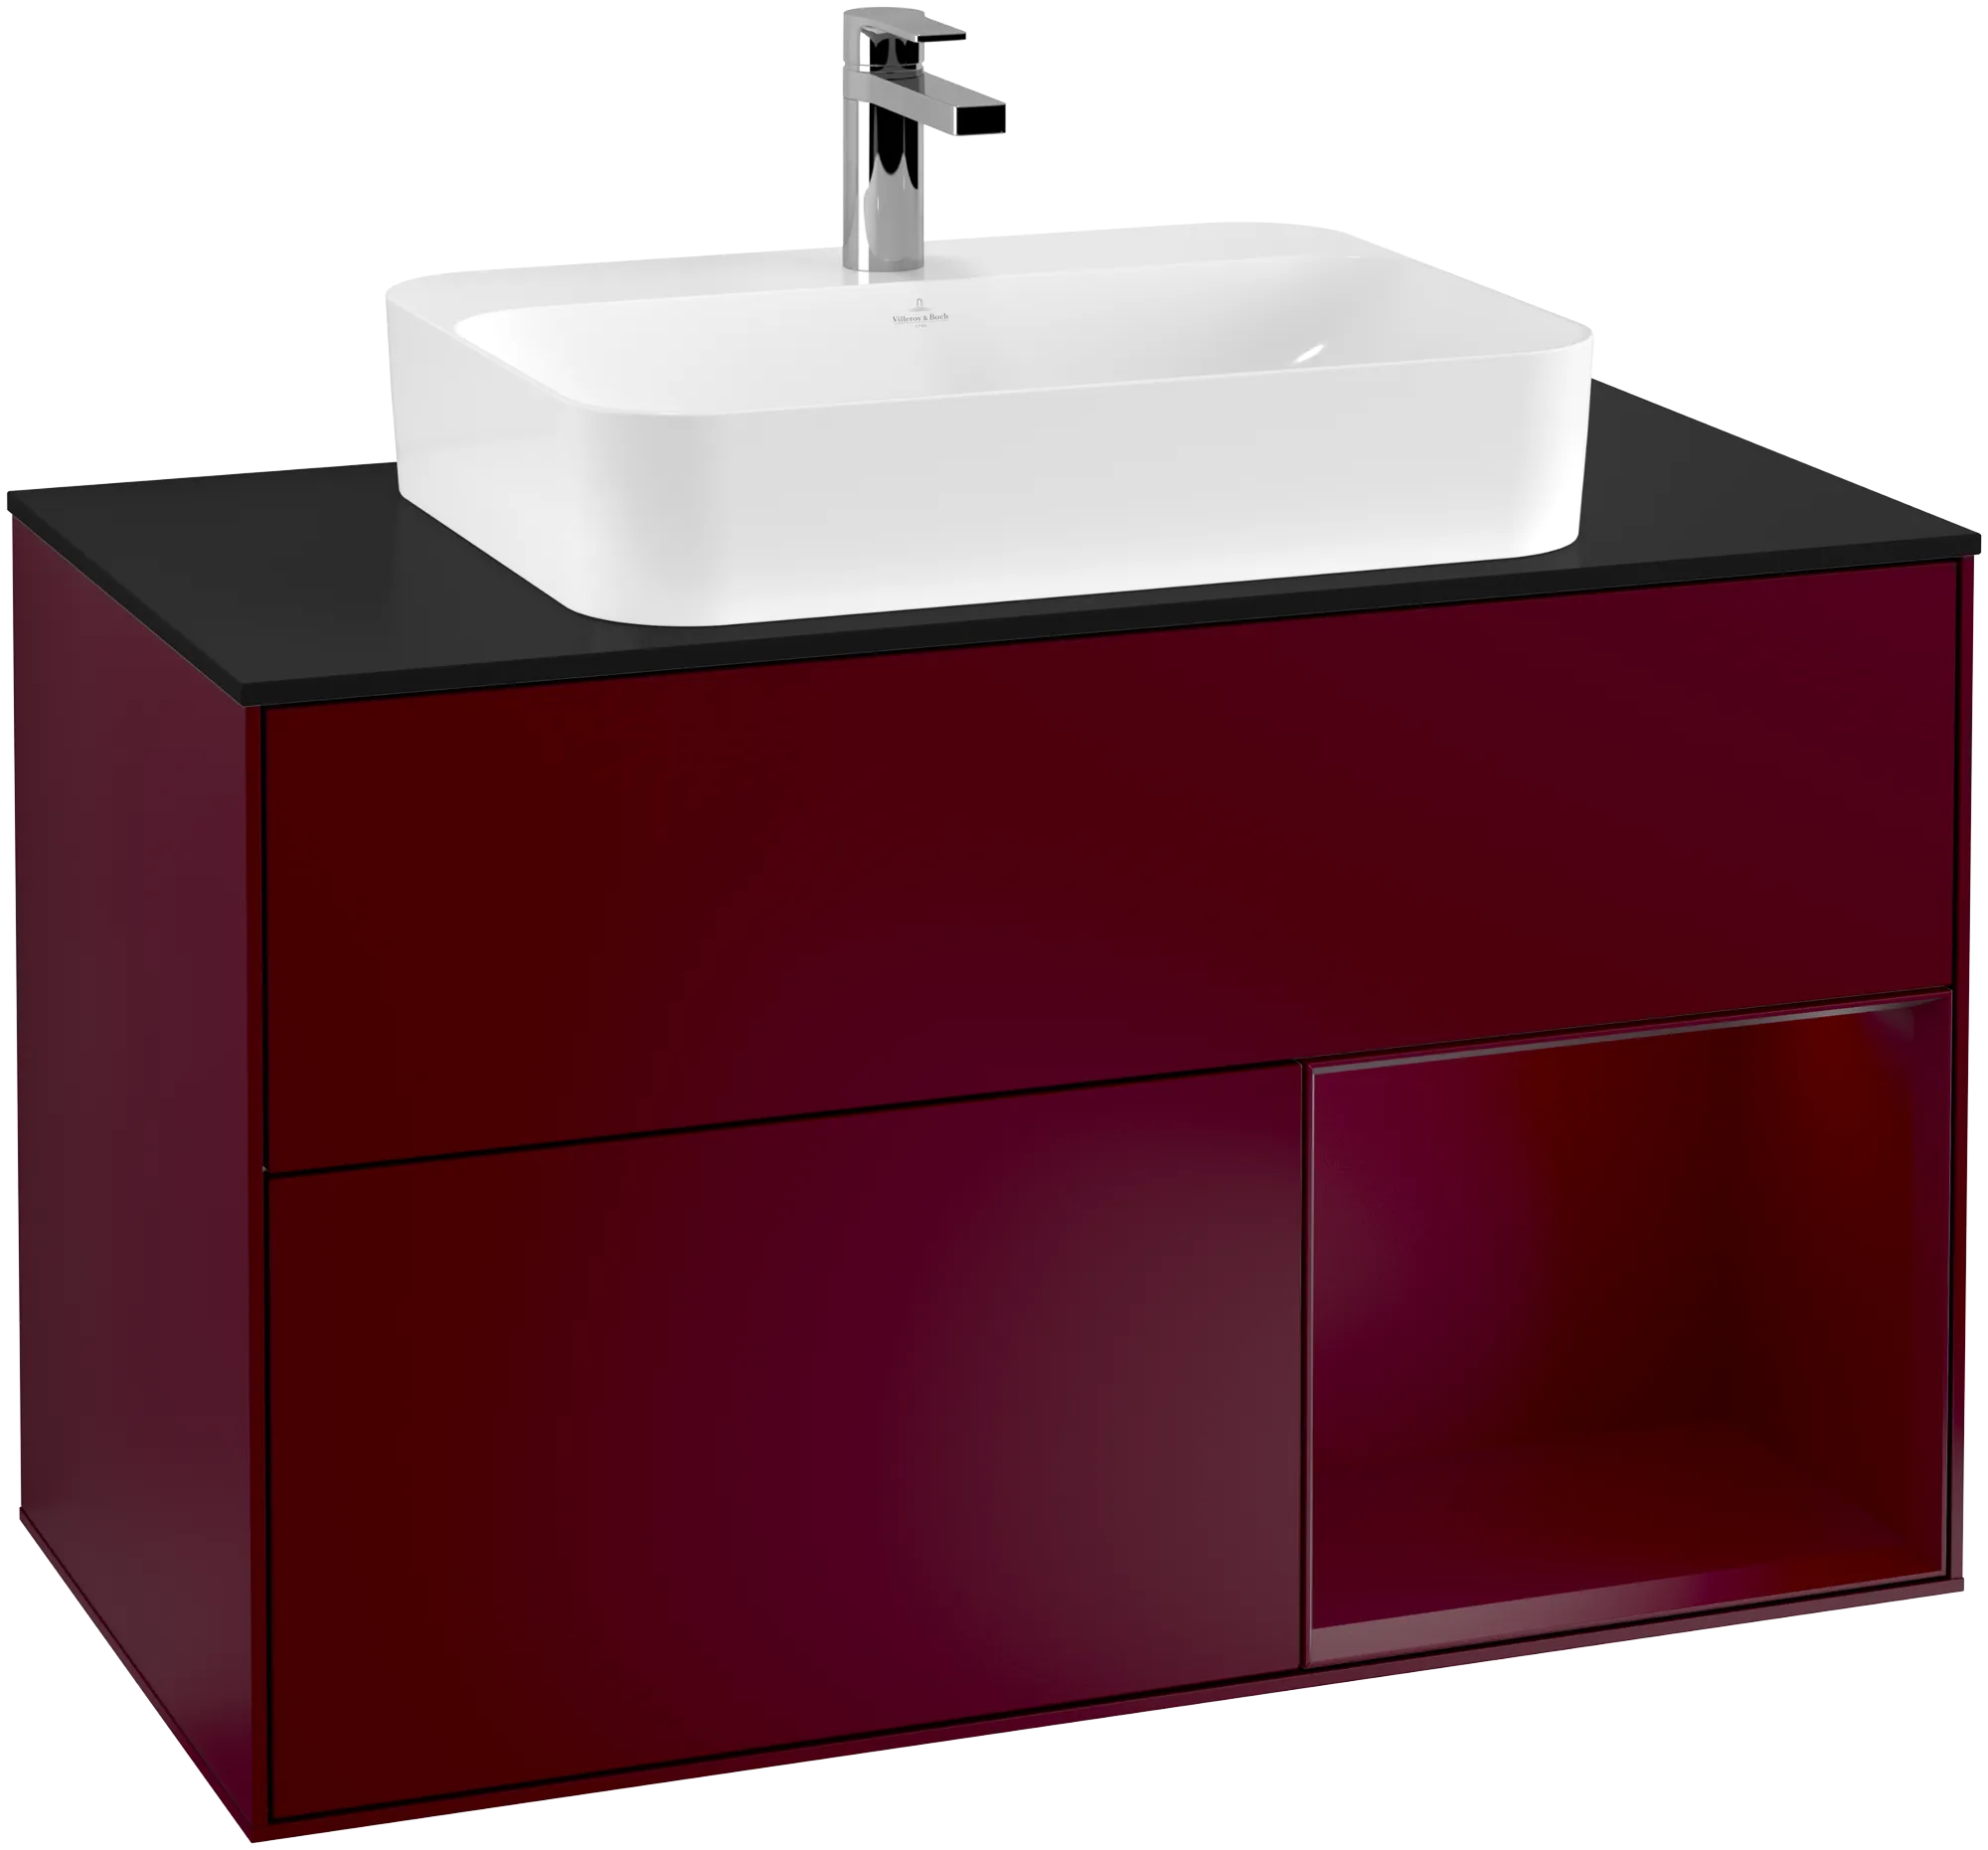 Picture of VILLEROY BOCH Finion Vanity unit, with lighting, 2 pull-out compartments, 1000 x 603 x 501 mm, Peony Matt Lacquer / Peony Matt Lacquer / Glass Black Matt #G372HBHB